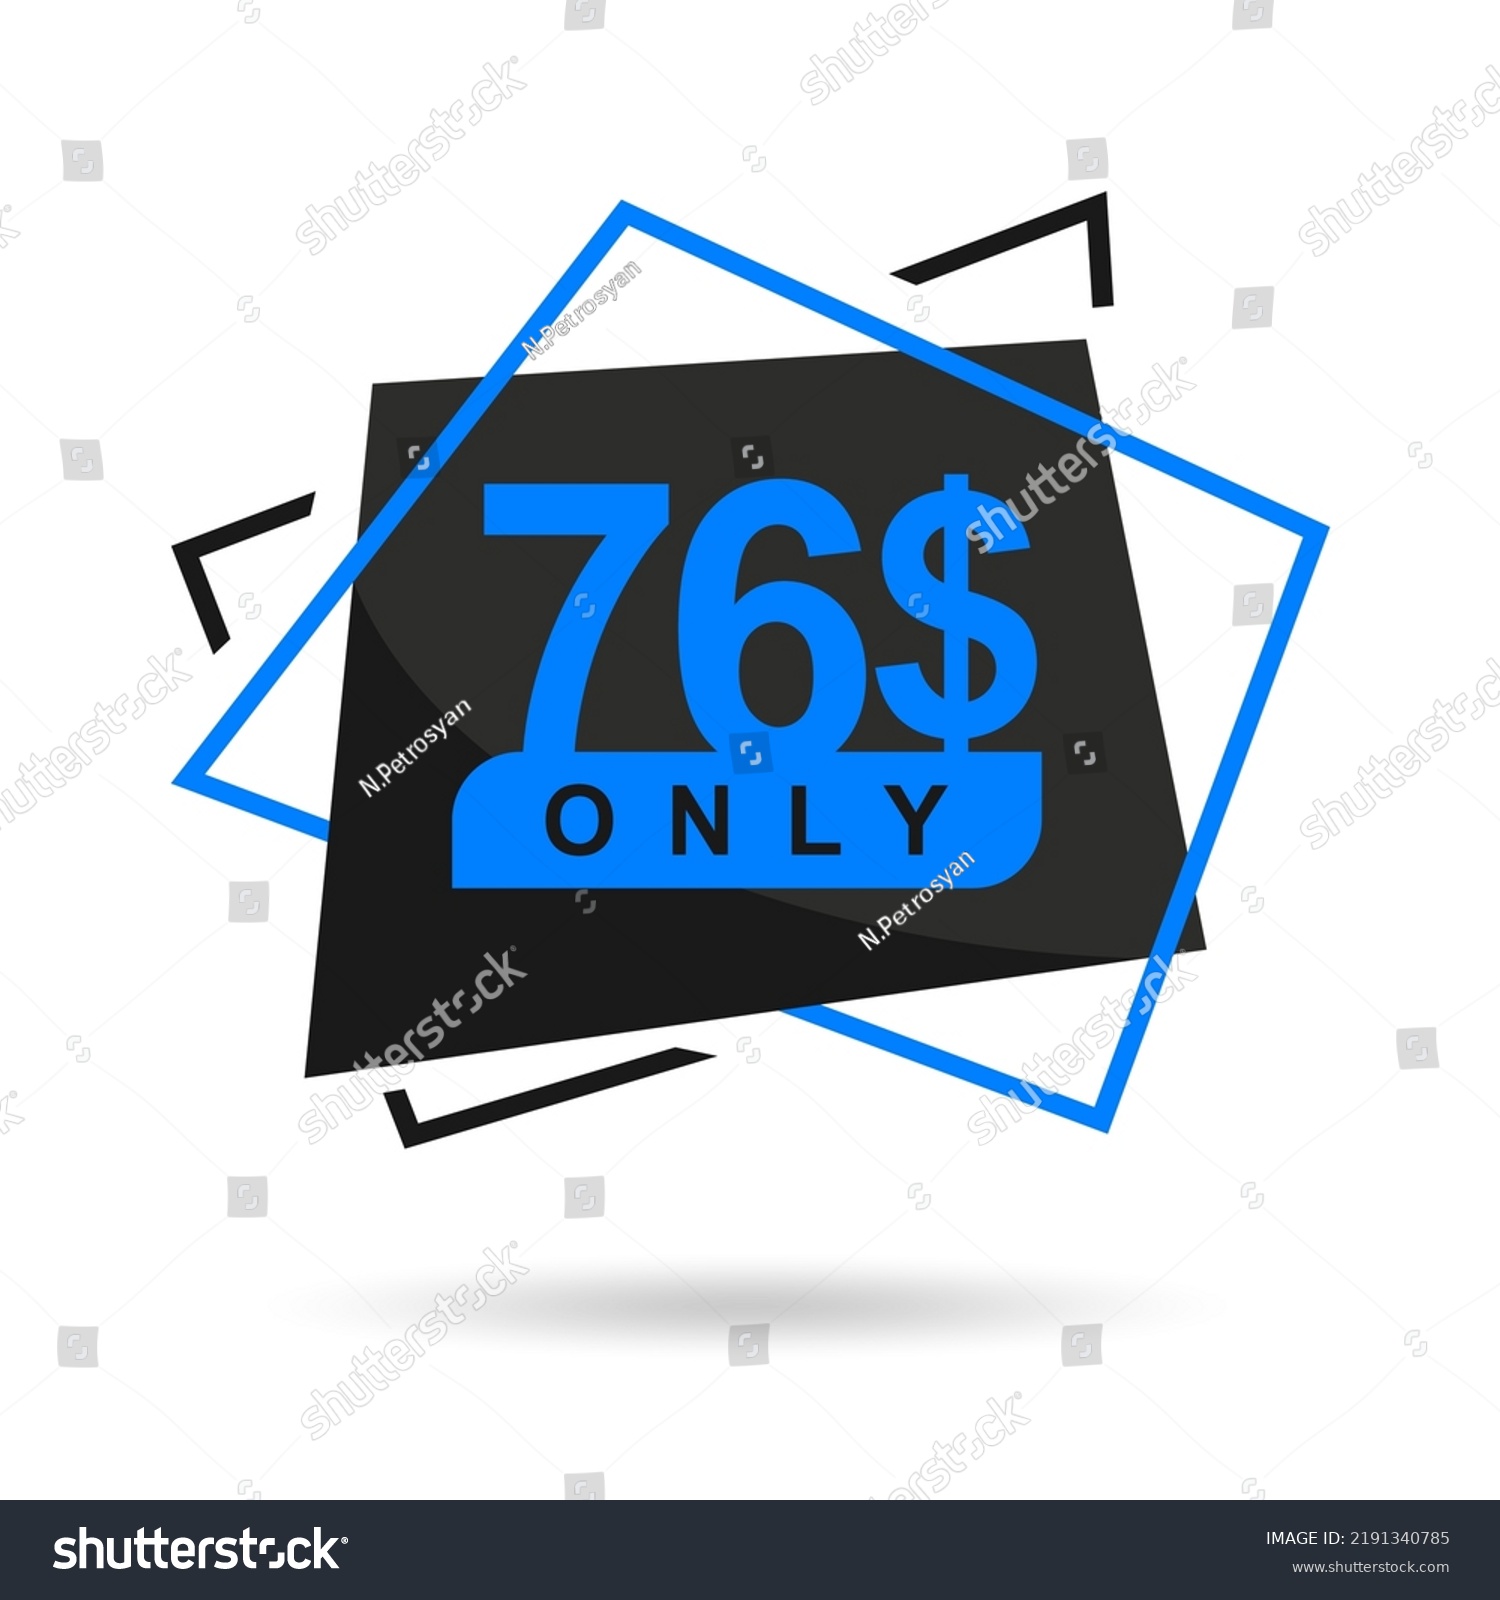 SVG of The price is only 76$. The price tag is only 76 dollars. Design of a beautiful price tag with a stylish font on a white background. Designed for special offer. Vector illustration of prices.  svg